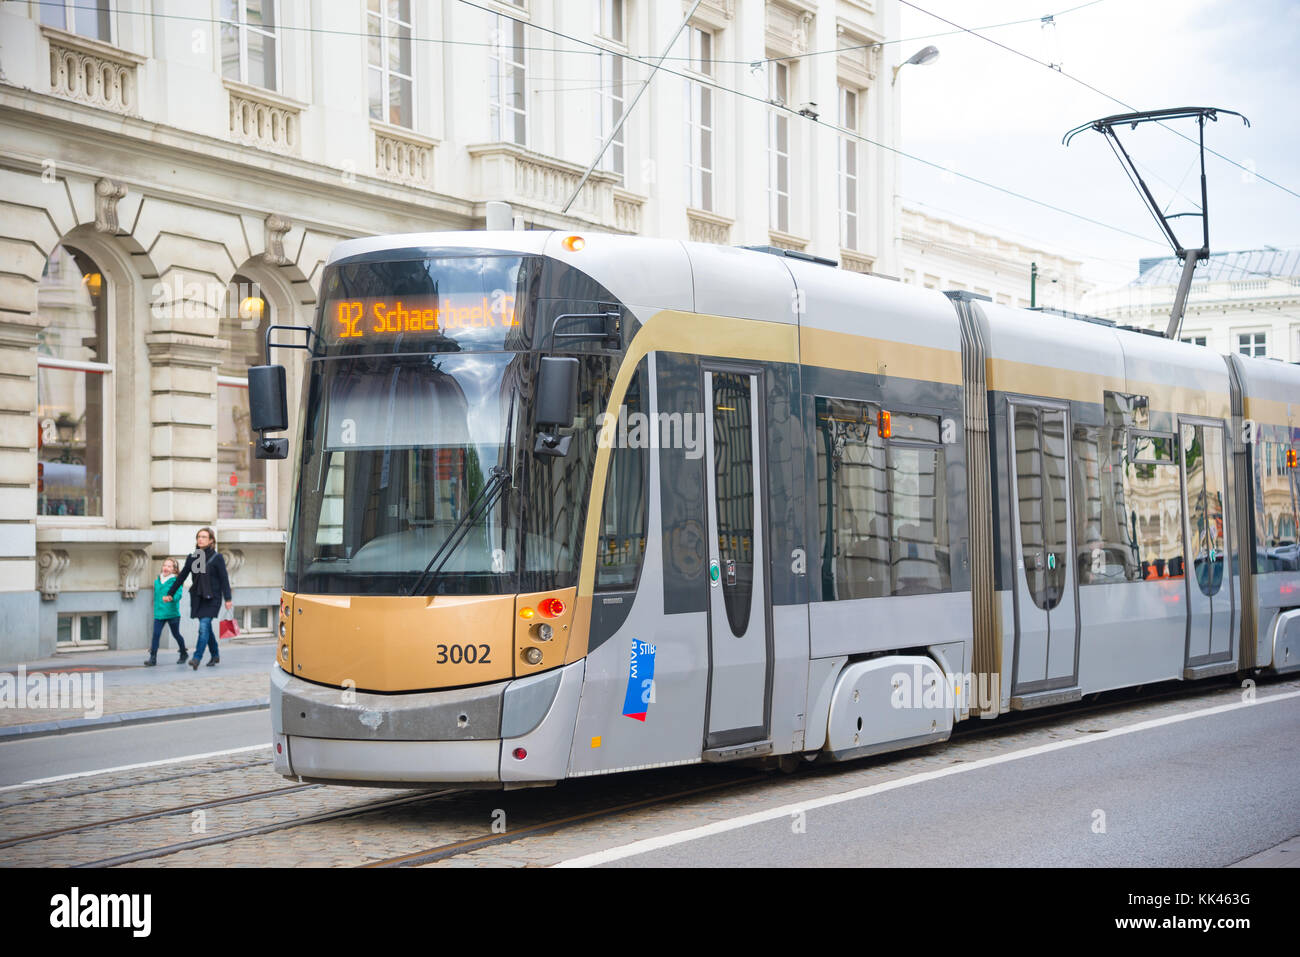 Brussels, Belgium - April 22, 2017: Tram in the city of Brussels. The Tram system of the city has 19 lines, and the first horse powered line started i Stock Photo